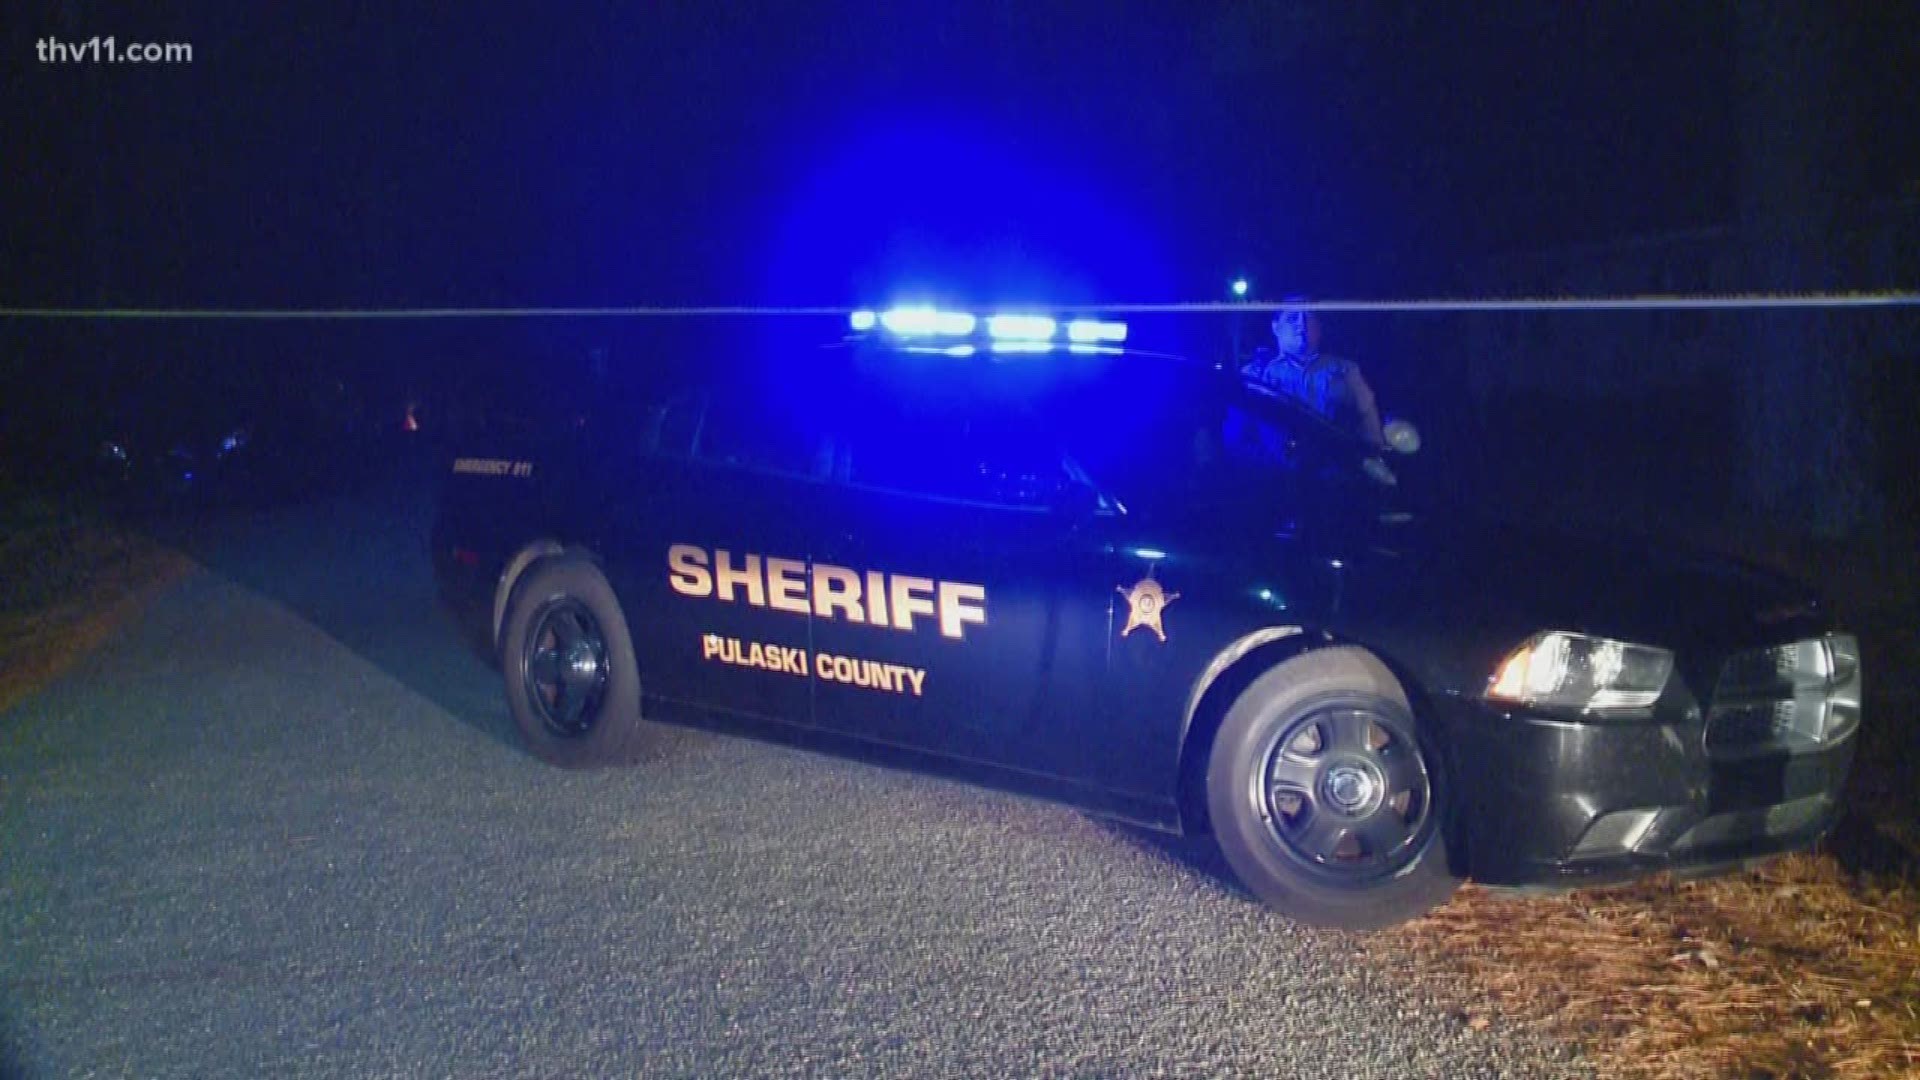 According to the Pulaski County Sheriff's Office, they are currently investigating a homicide after discovering human remains on Wright Way Road.